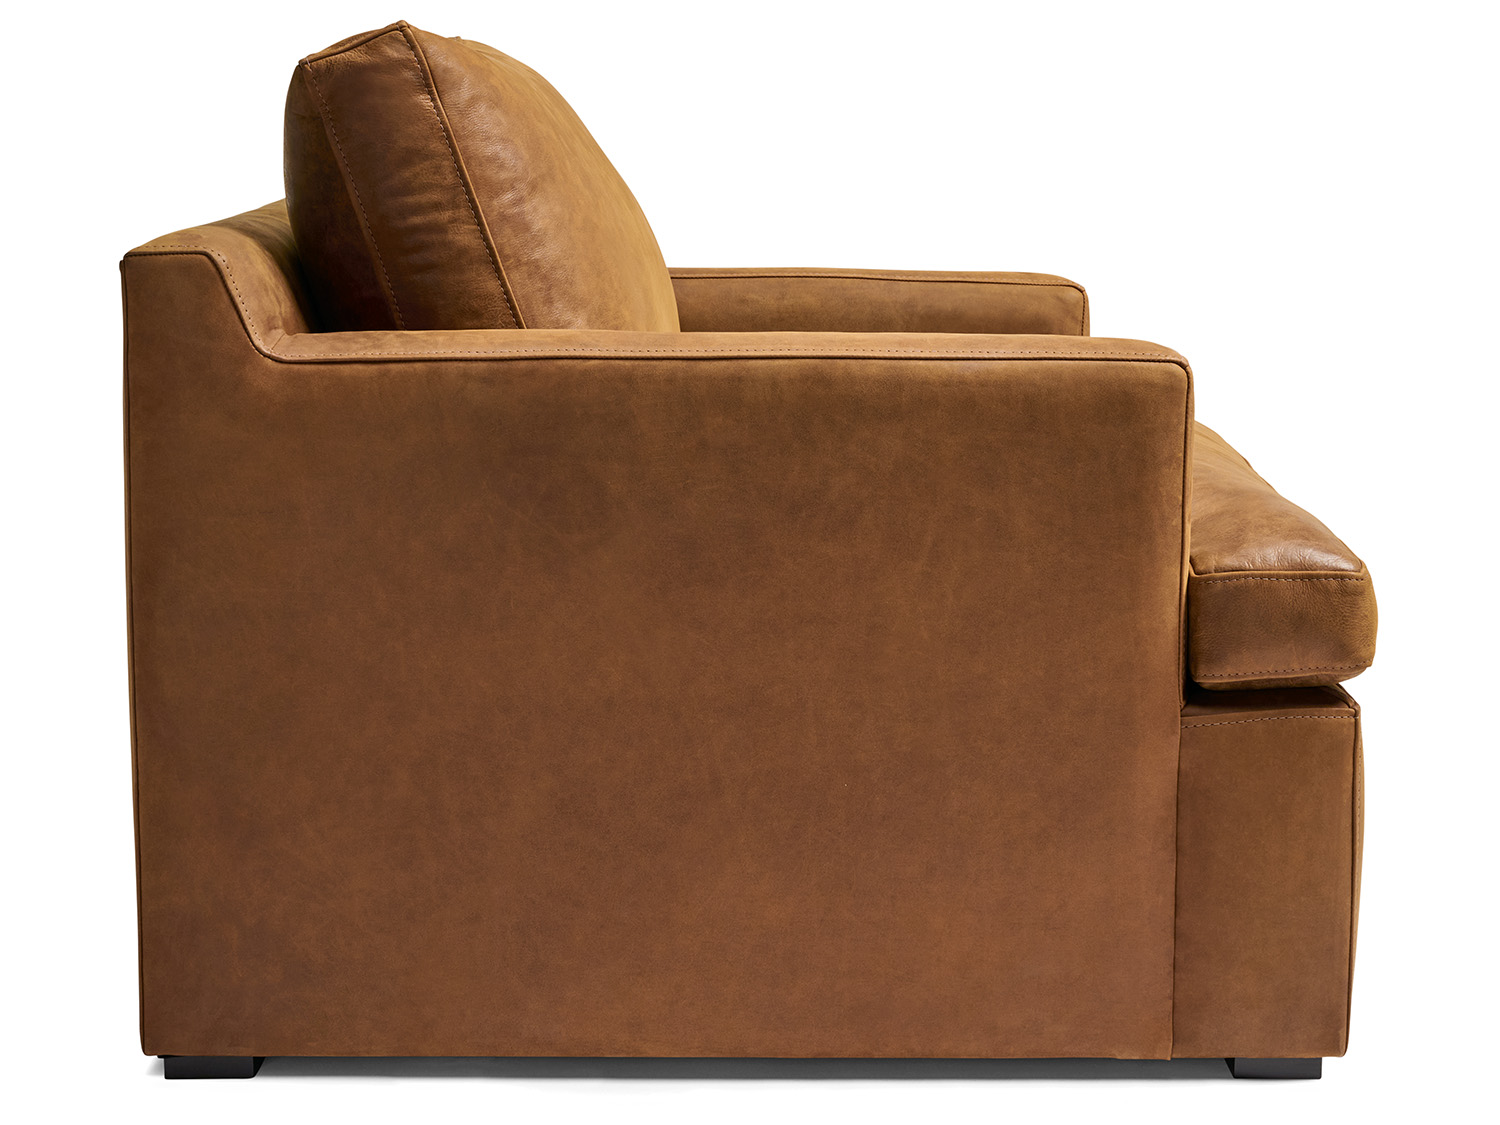 In Stock 36 x 40 Muir Track Arm Leather Chair in Full Aniline Burnham Sycamore Nubuck Leather - side